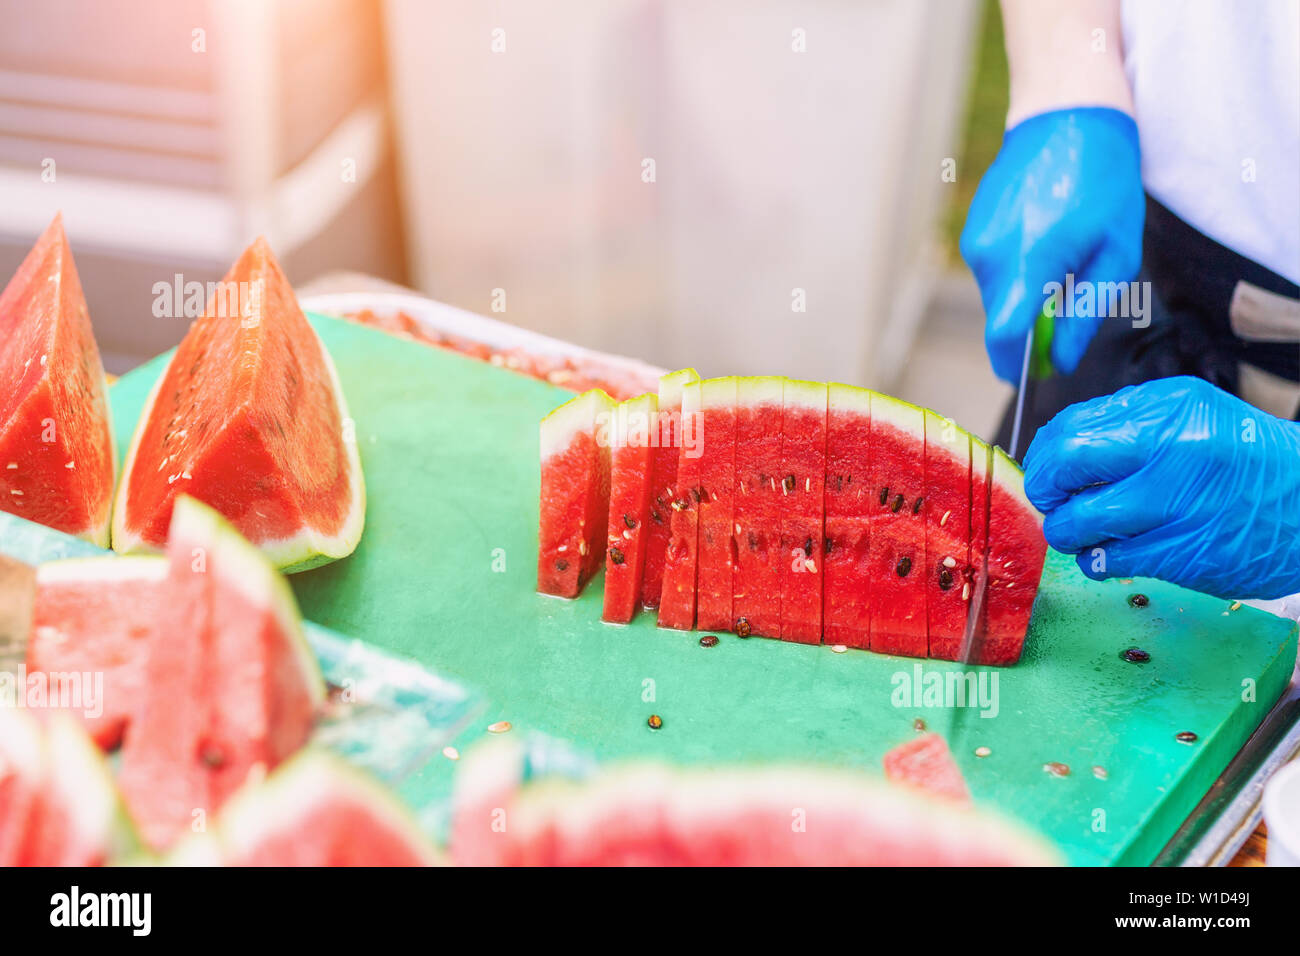 Cook in rubber gloves peeling and slicing gresh tasty juicy sliced watermelon for hotel guests at tropical resort outdoors Stock Photo